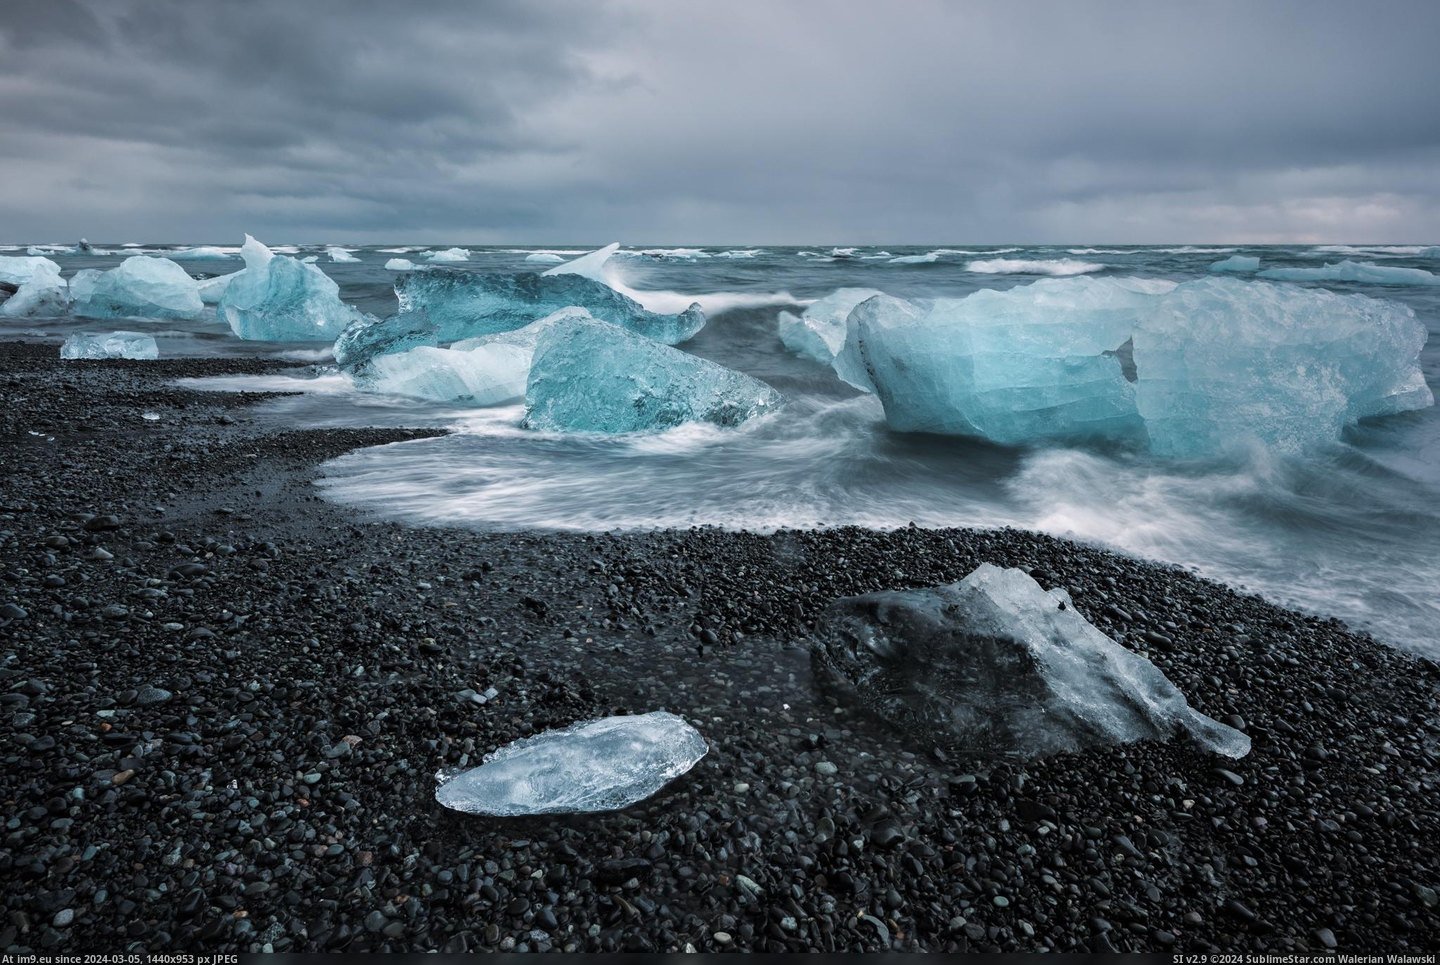 #Black #Beach #Road #Volcanic #Washing #Glacial #Icebergs #Sand #Ring #Lagoon [Earthporn]  Icebergs washing up on a black volcanic sand beach across the ring road from the glacial lagoon - Jökulsárlón, Icel Pic. (Obraz z album My r/EARTHPORN favs))